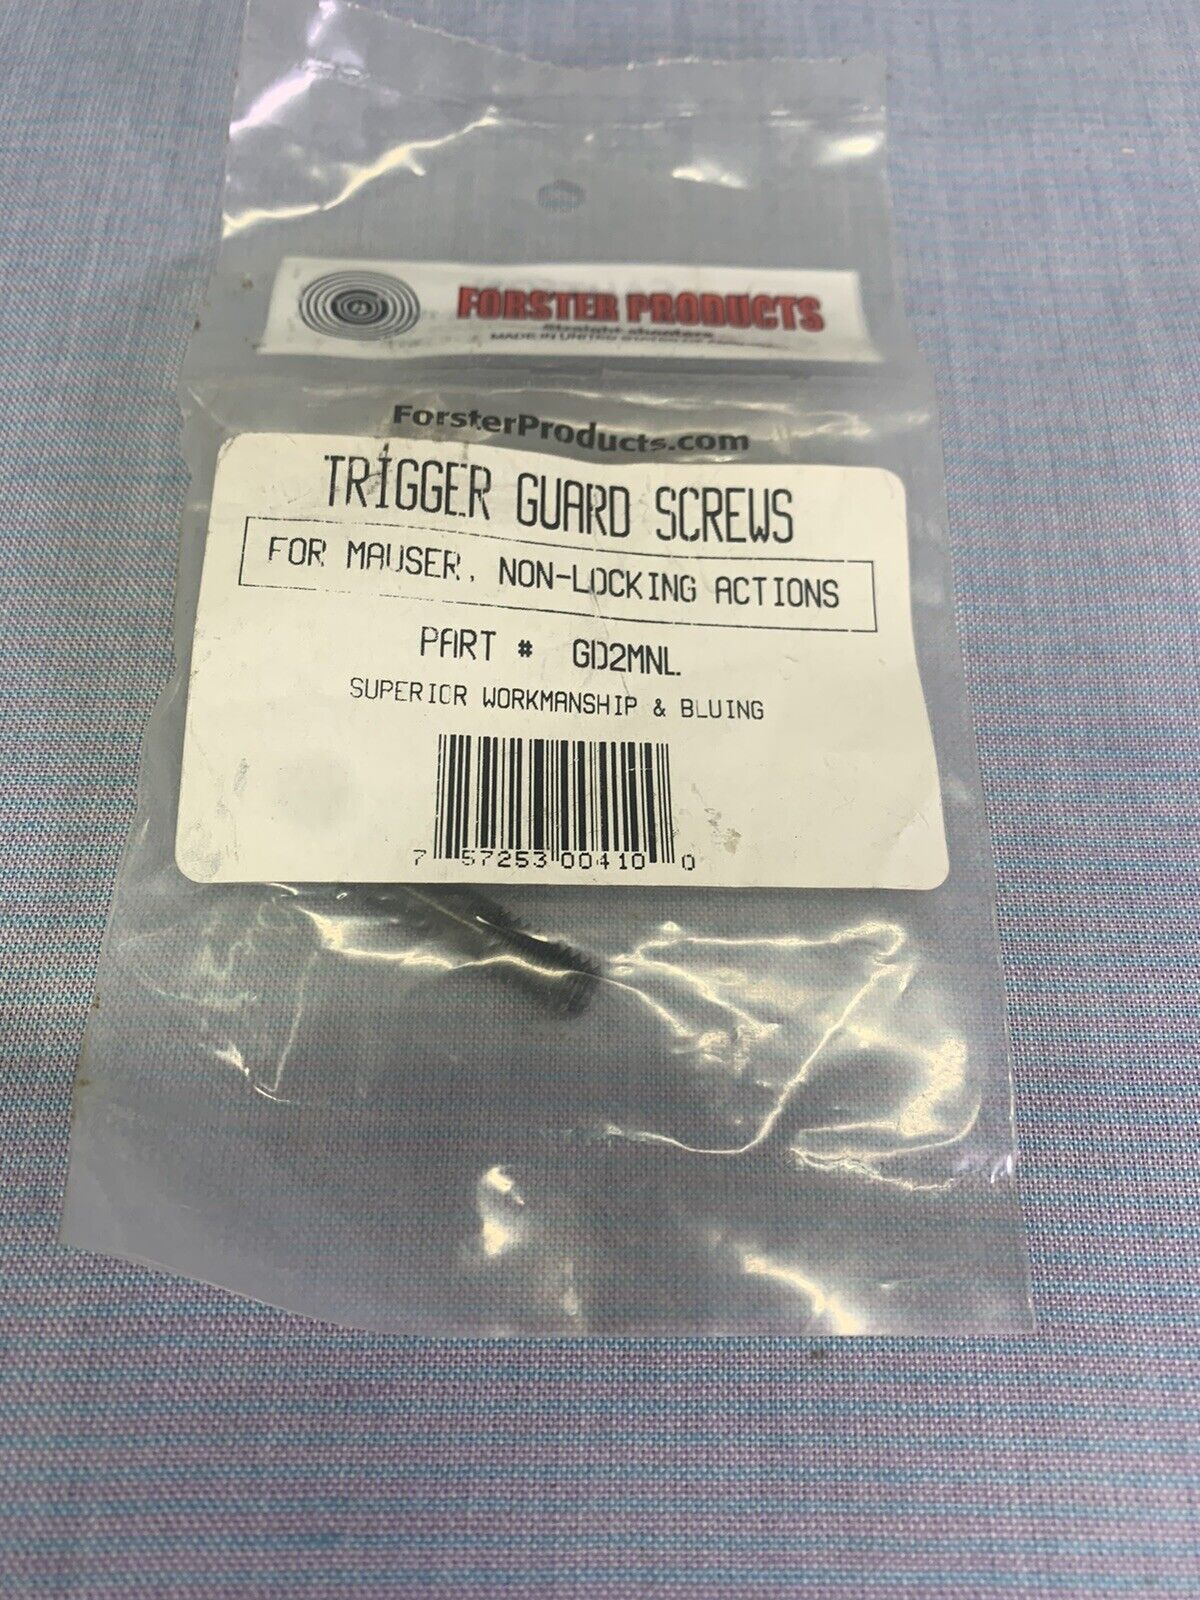 MAUSER TRIGGER GUARD SCREW SET - NON LOCKING ACTIONS - FORESTER PRODUCTS GD2MNL